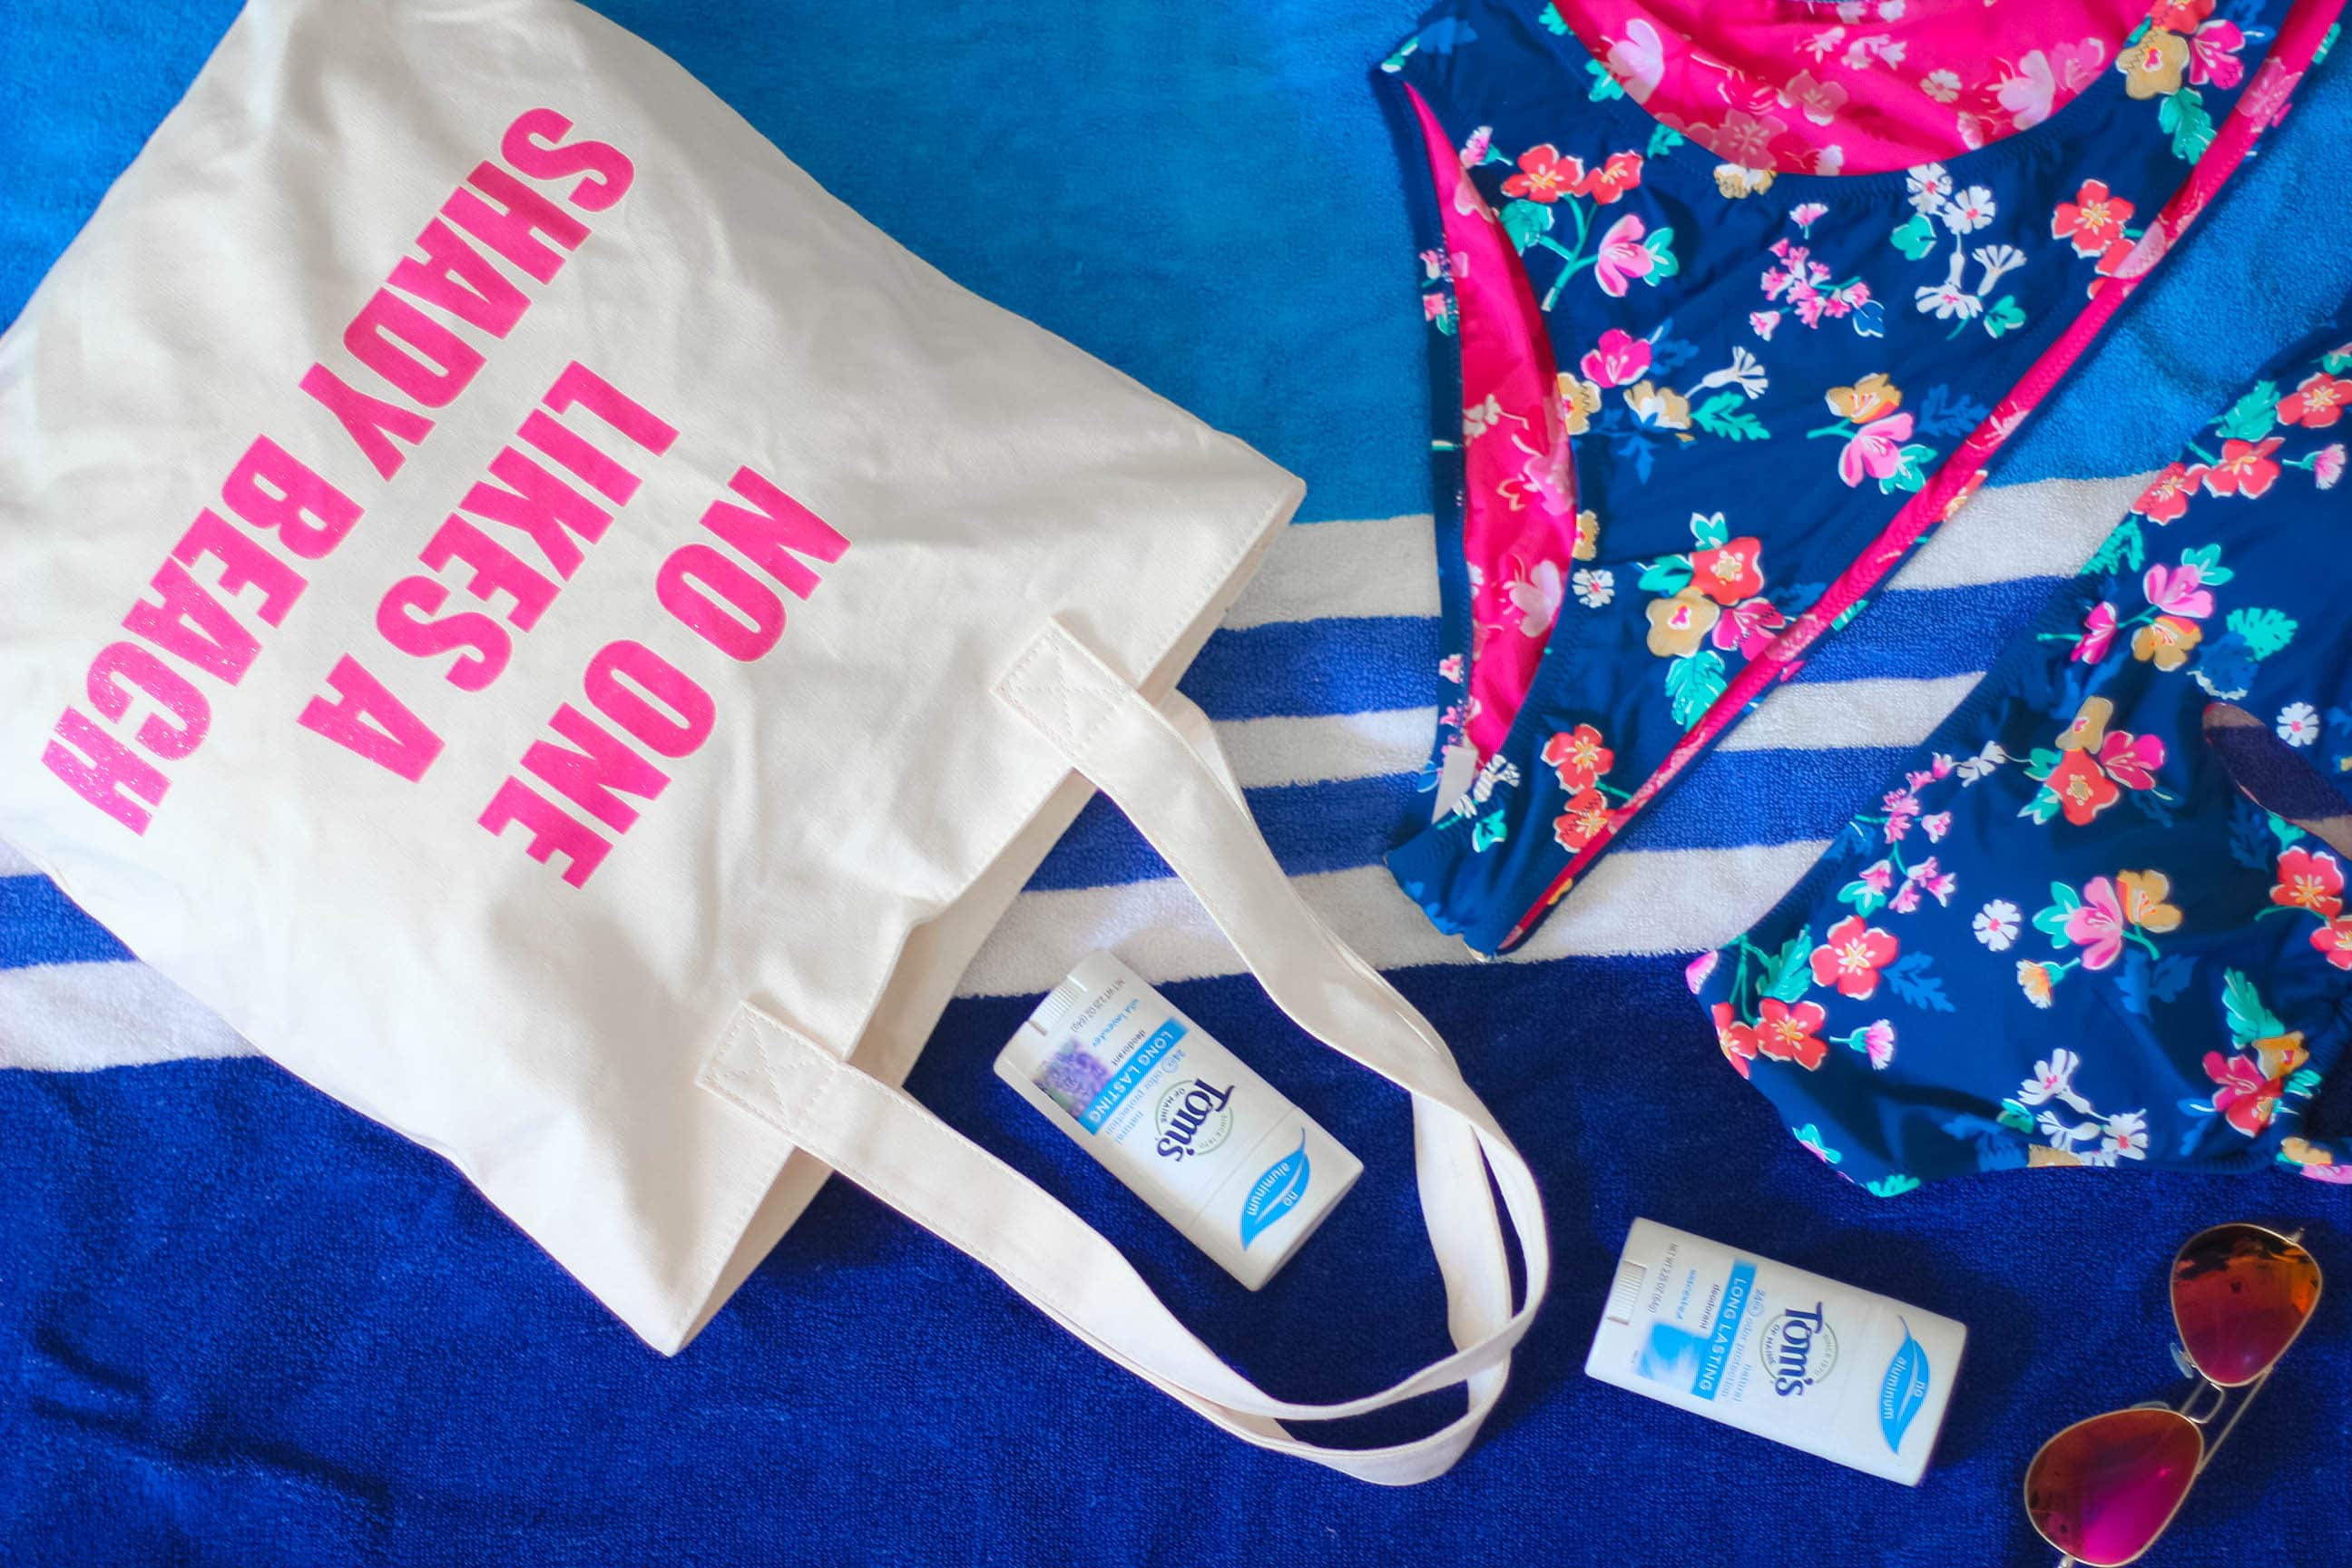 missyonmadison, missyonmadison instagram, melissa tierney, melissa tierney instagram, fashion blogger, beauty blogger, beauty buys, toms of maine, deodorant, stay fresh, fresh summer picks, whats in my bag, whats in my beach bag, hygiene, summer hygiene tips, 